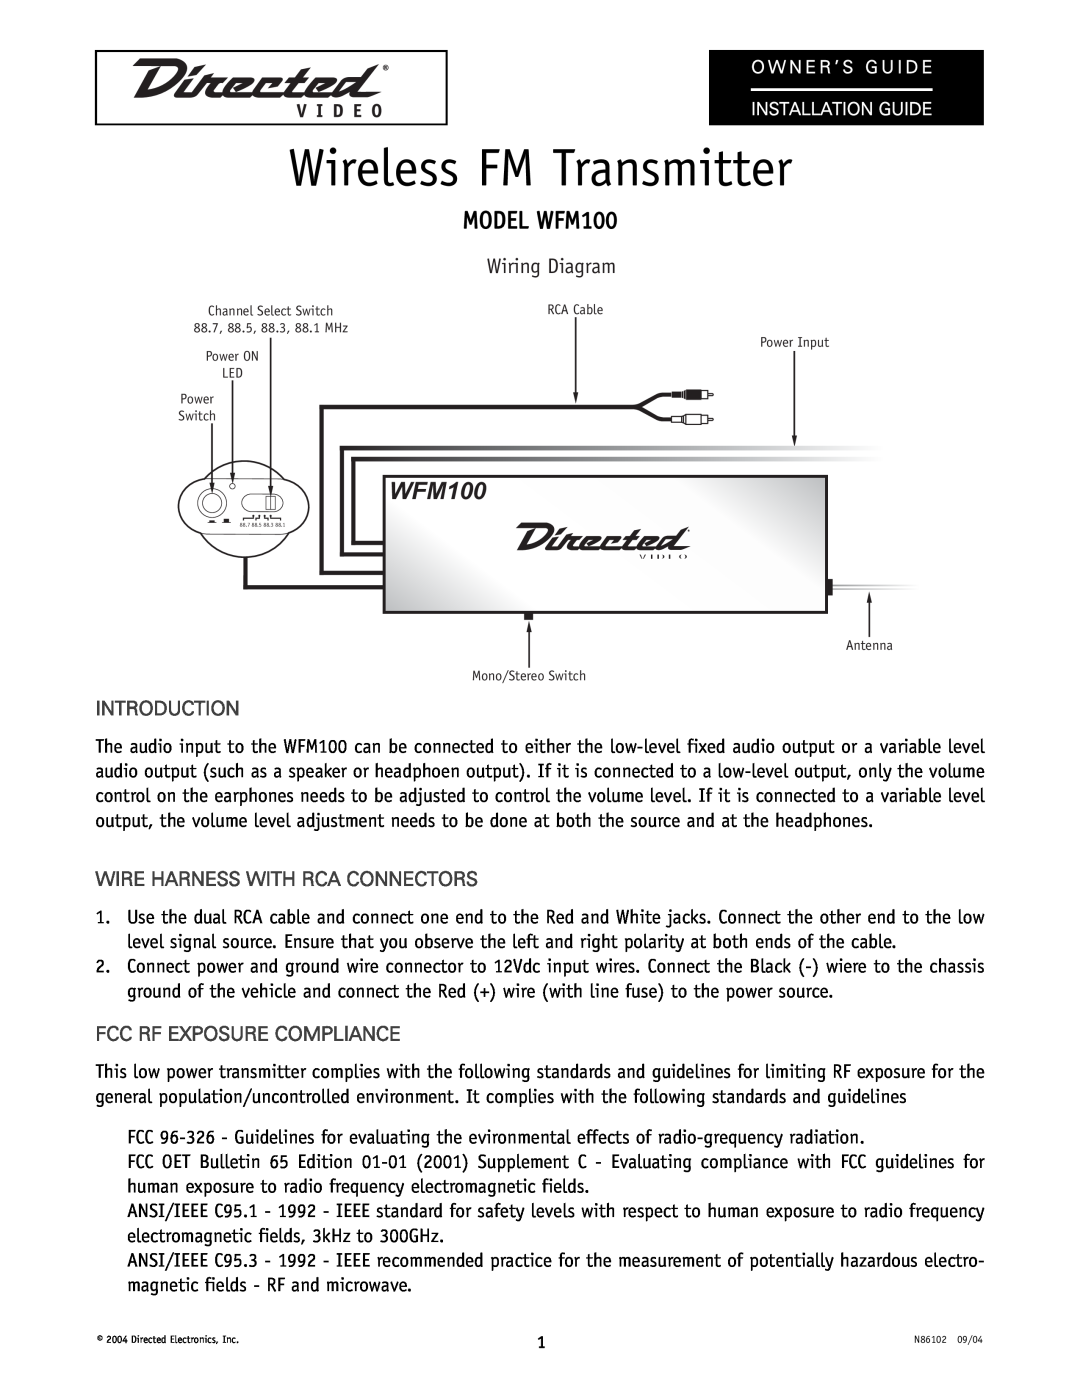 Directed Video manual Wireless FM Transmitter, MODEL WFM100, Wiring Diagram, Introduction, Fcc Rf Exposure Compliance 